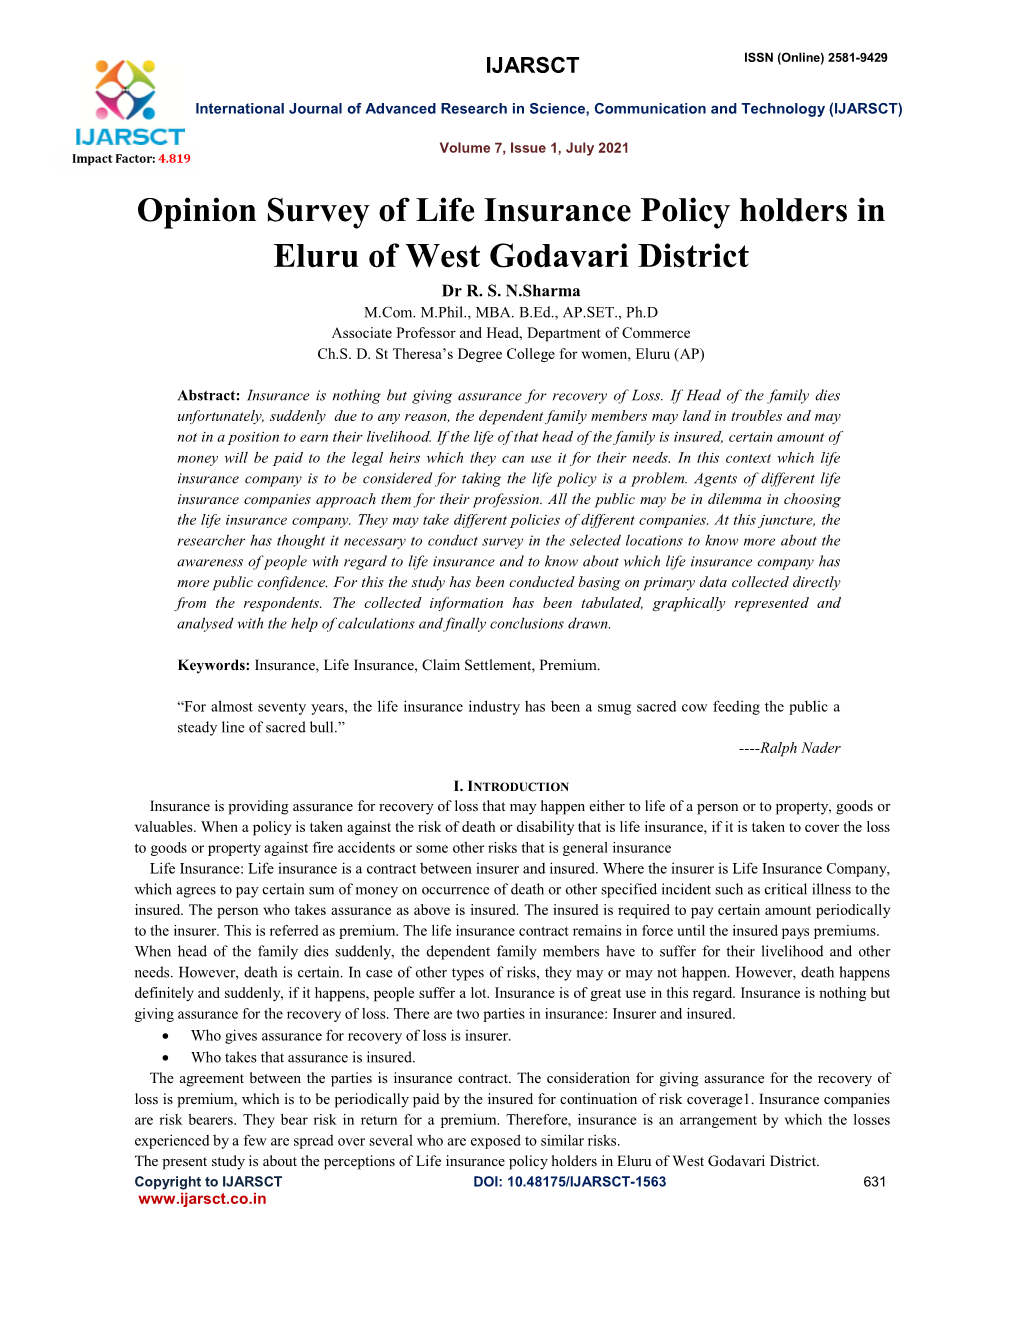 Opinion Survey of Life Insurance Policy Holders in Eluru of West Godavari District Dr R